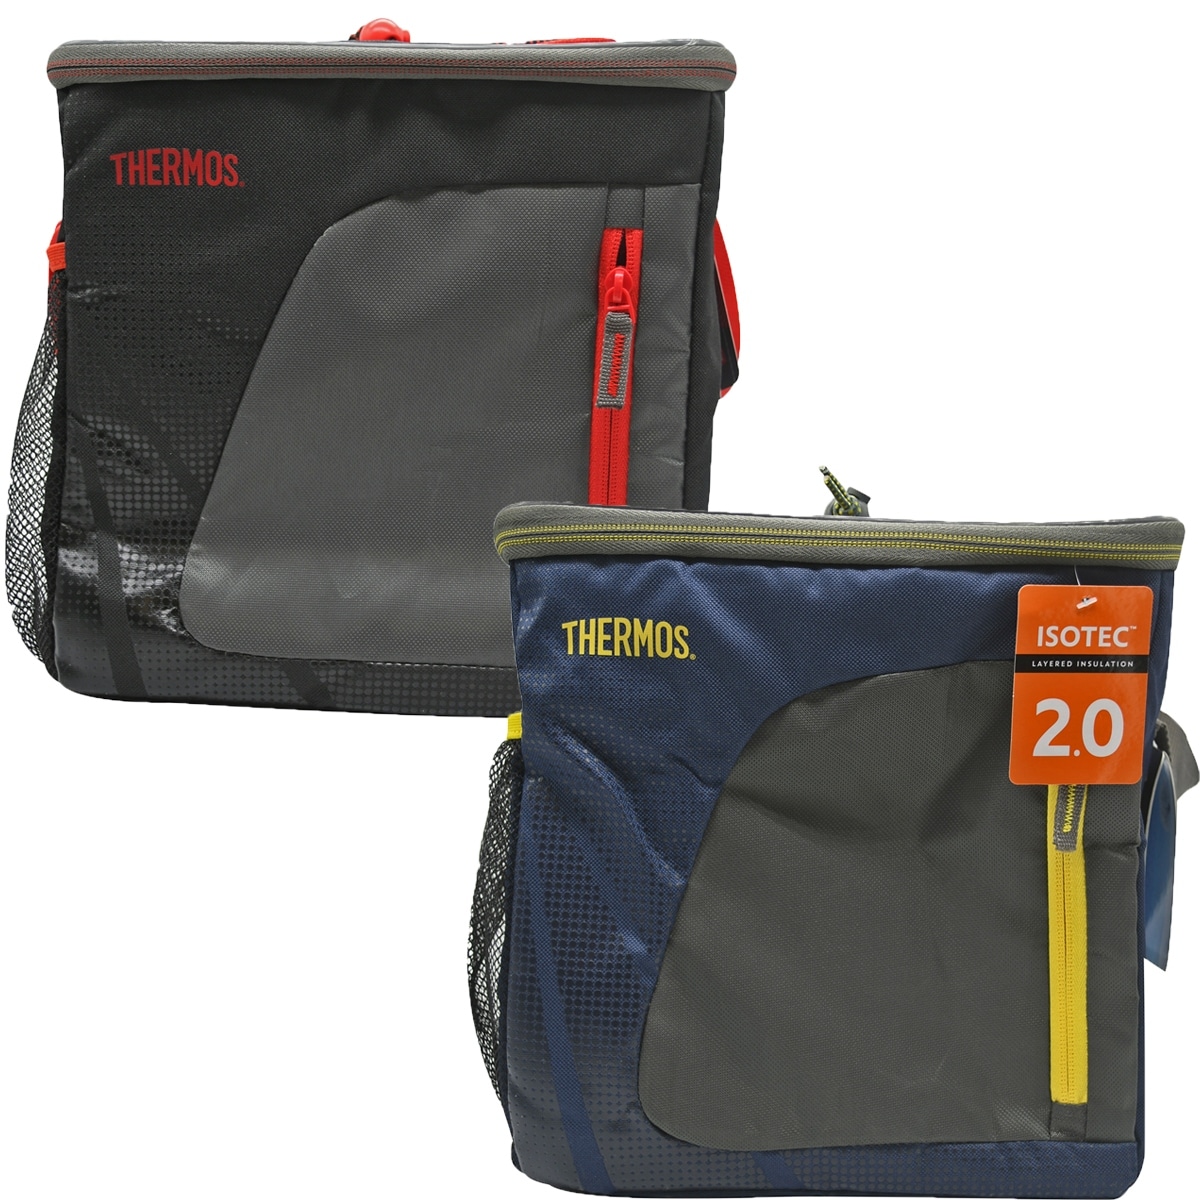 thermos radiance lunch bag